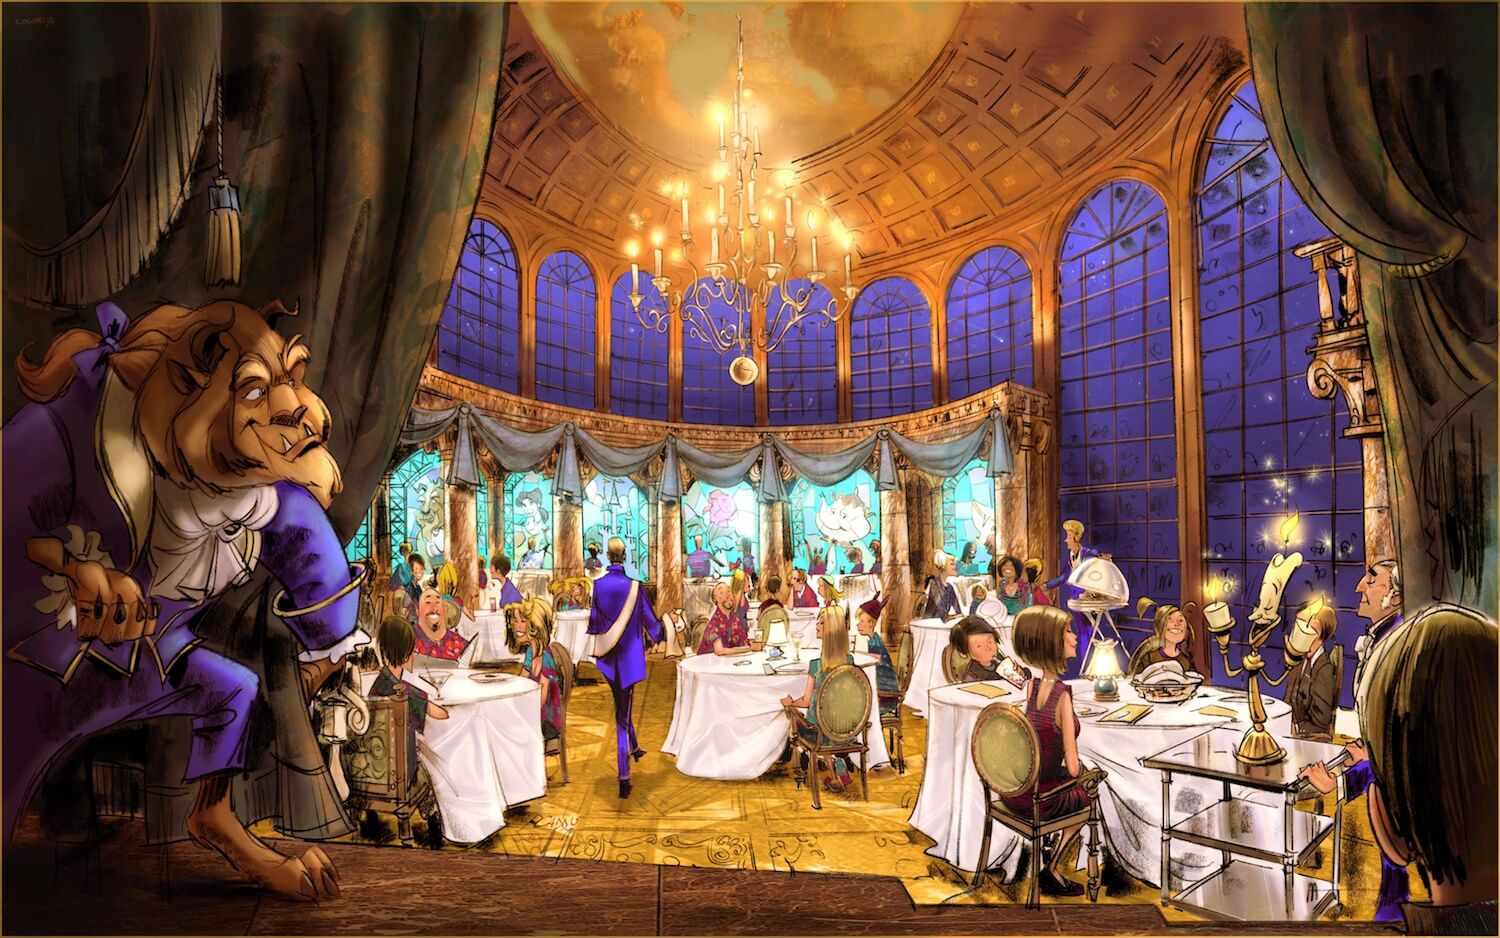 Beauty And The Beast Dinner
 Be Our Guest Restaurant menu served up by Walt Disney